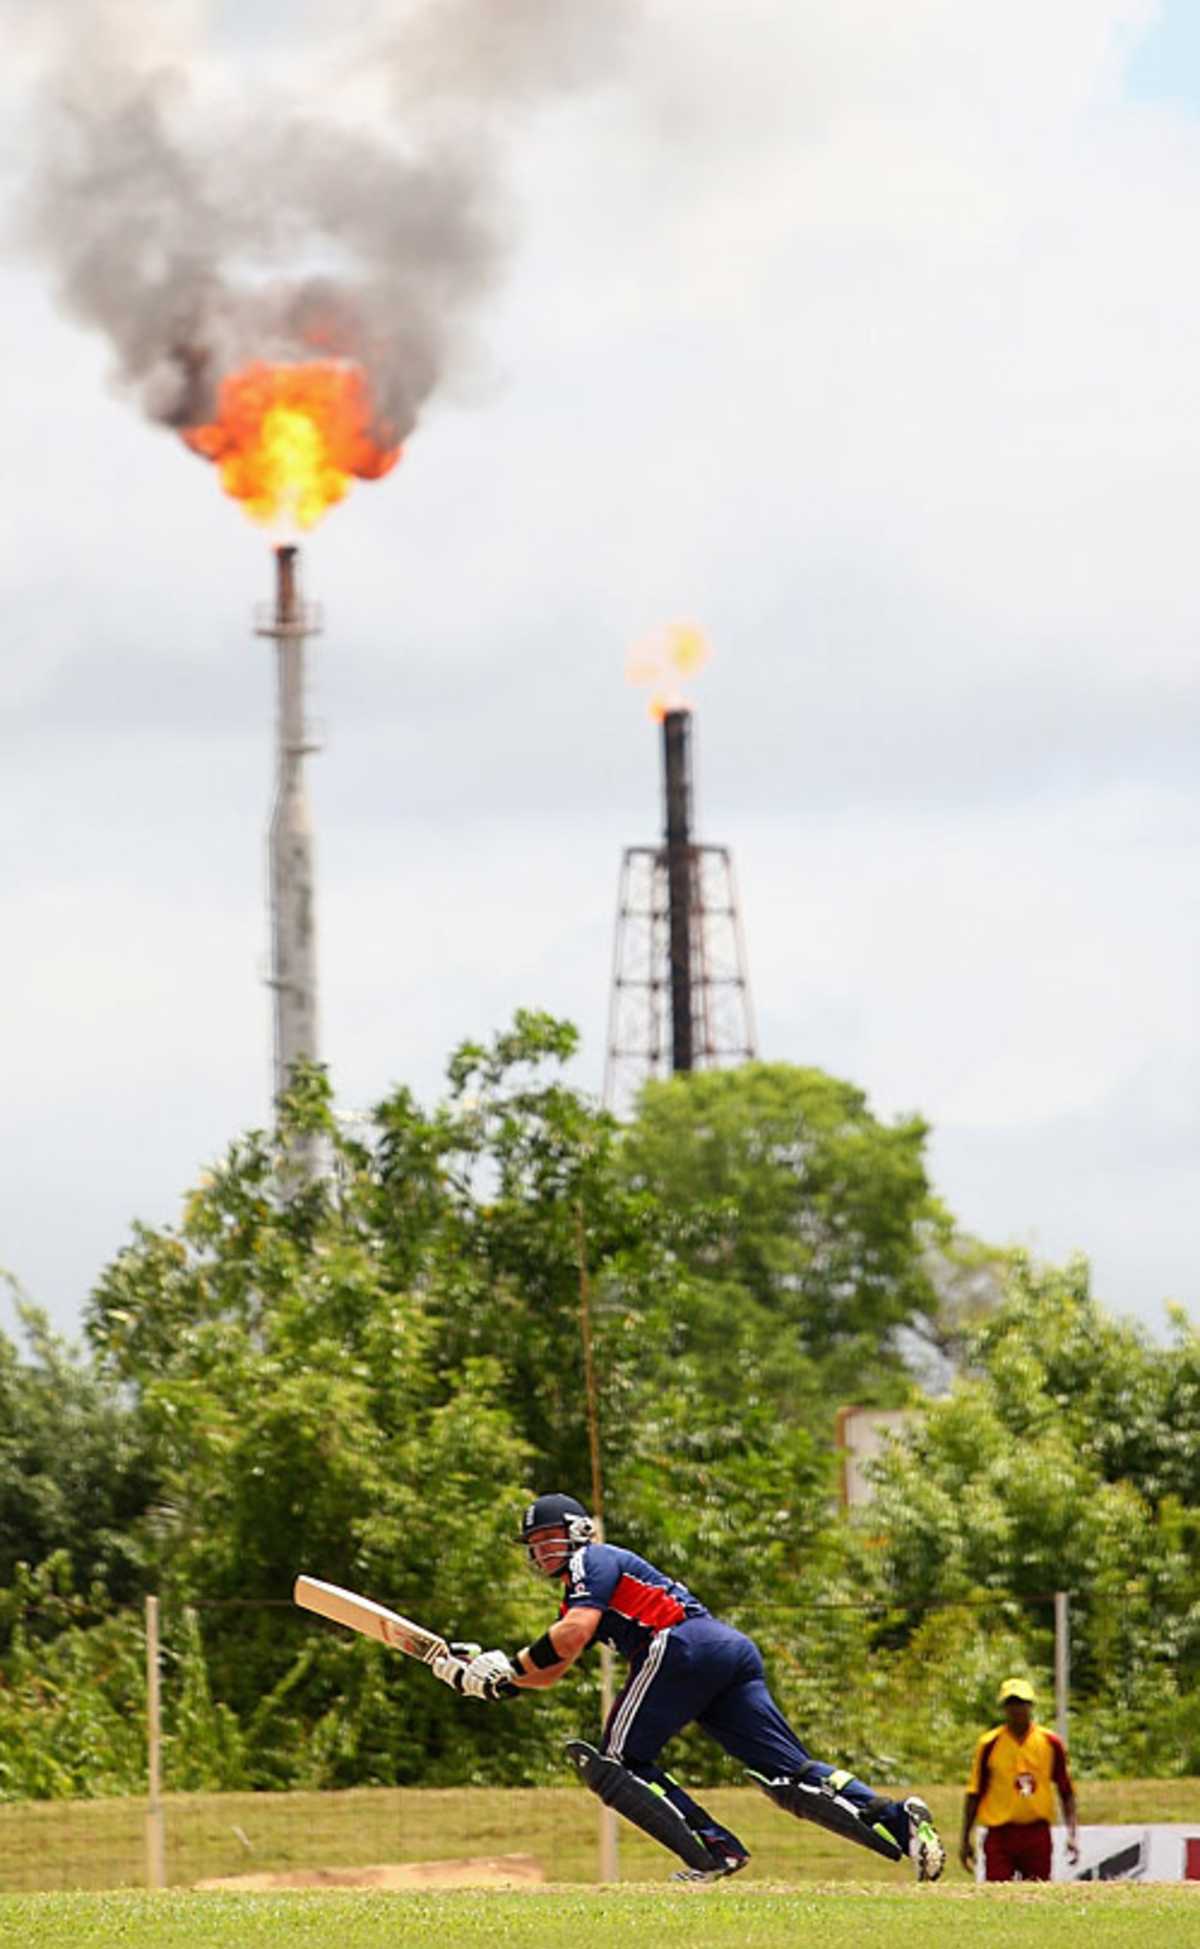 Ian Bell is pictured in front of a large oil refinery at Guaracara Park, Trinidad, March 14, 2009